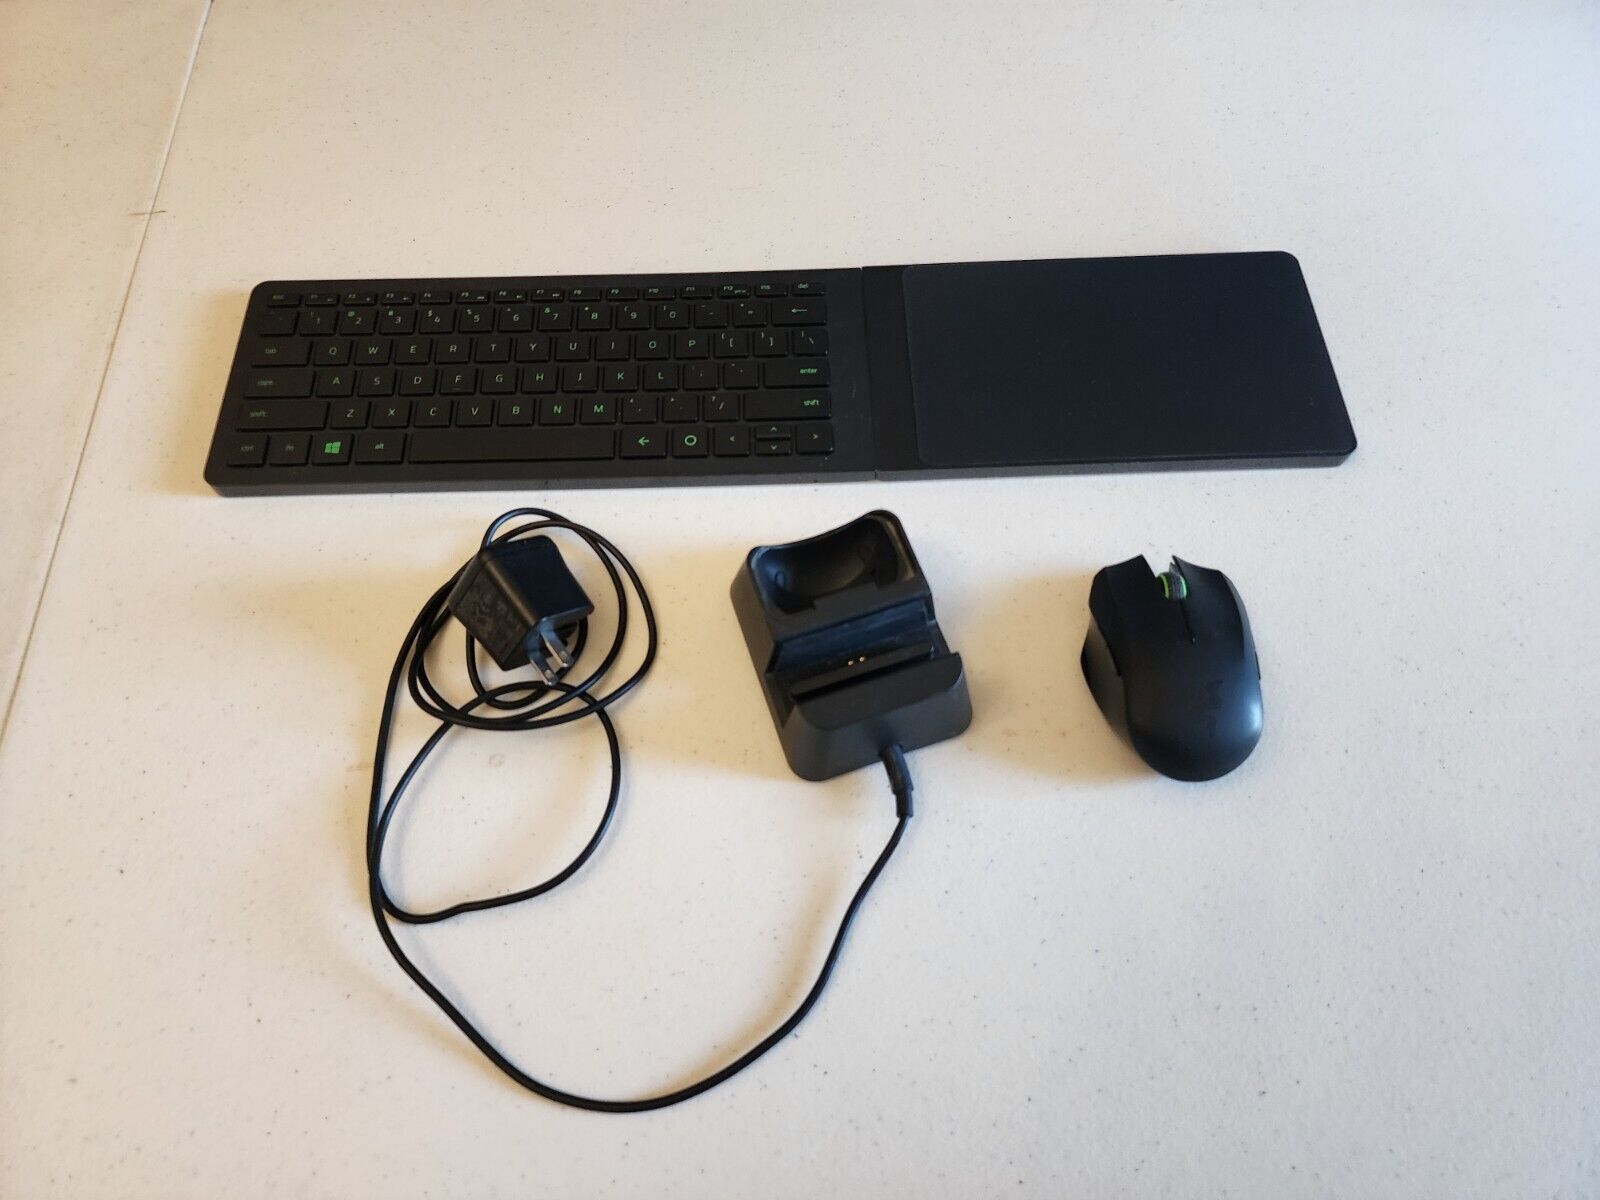 Razer Turret Wireless Keyboard, Charger and Mouse Lapboard